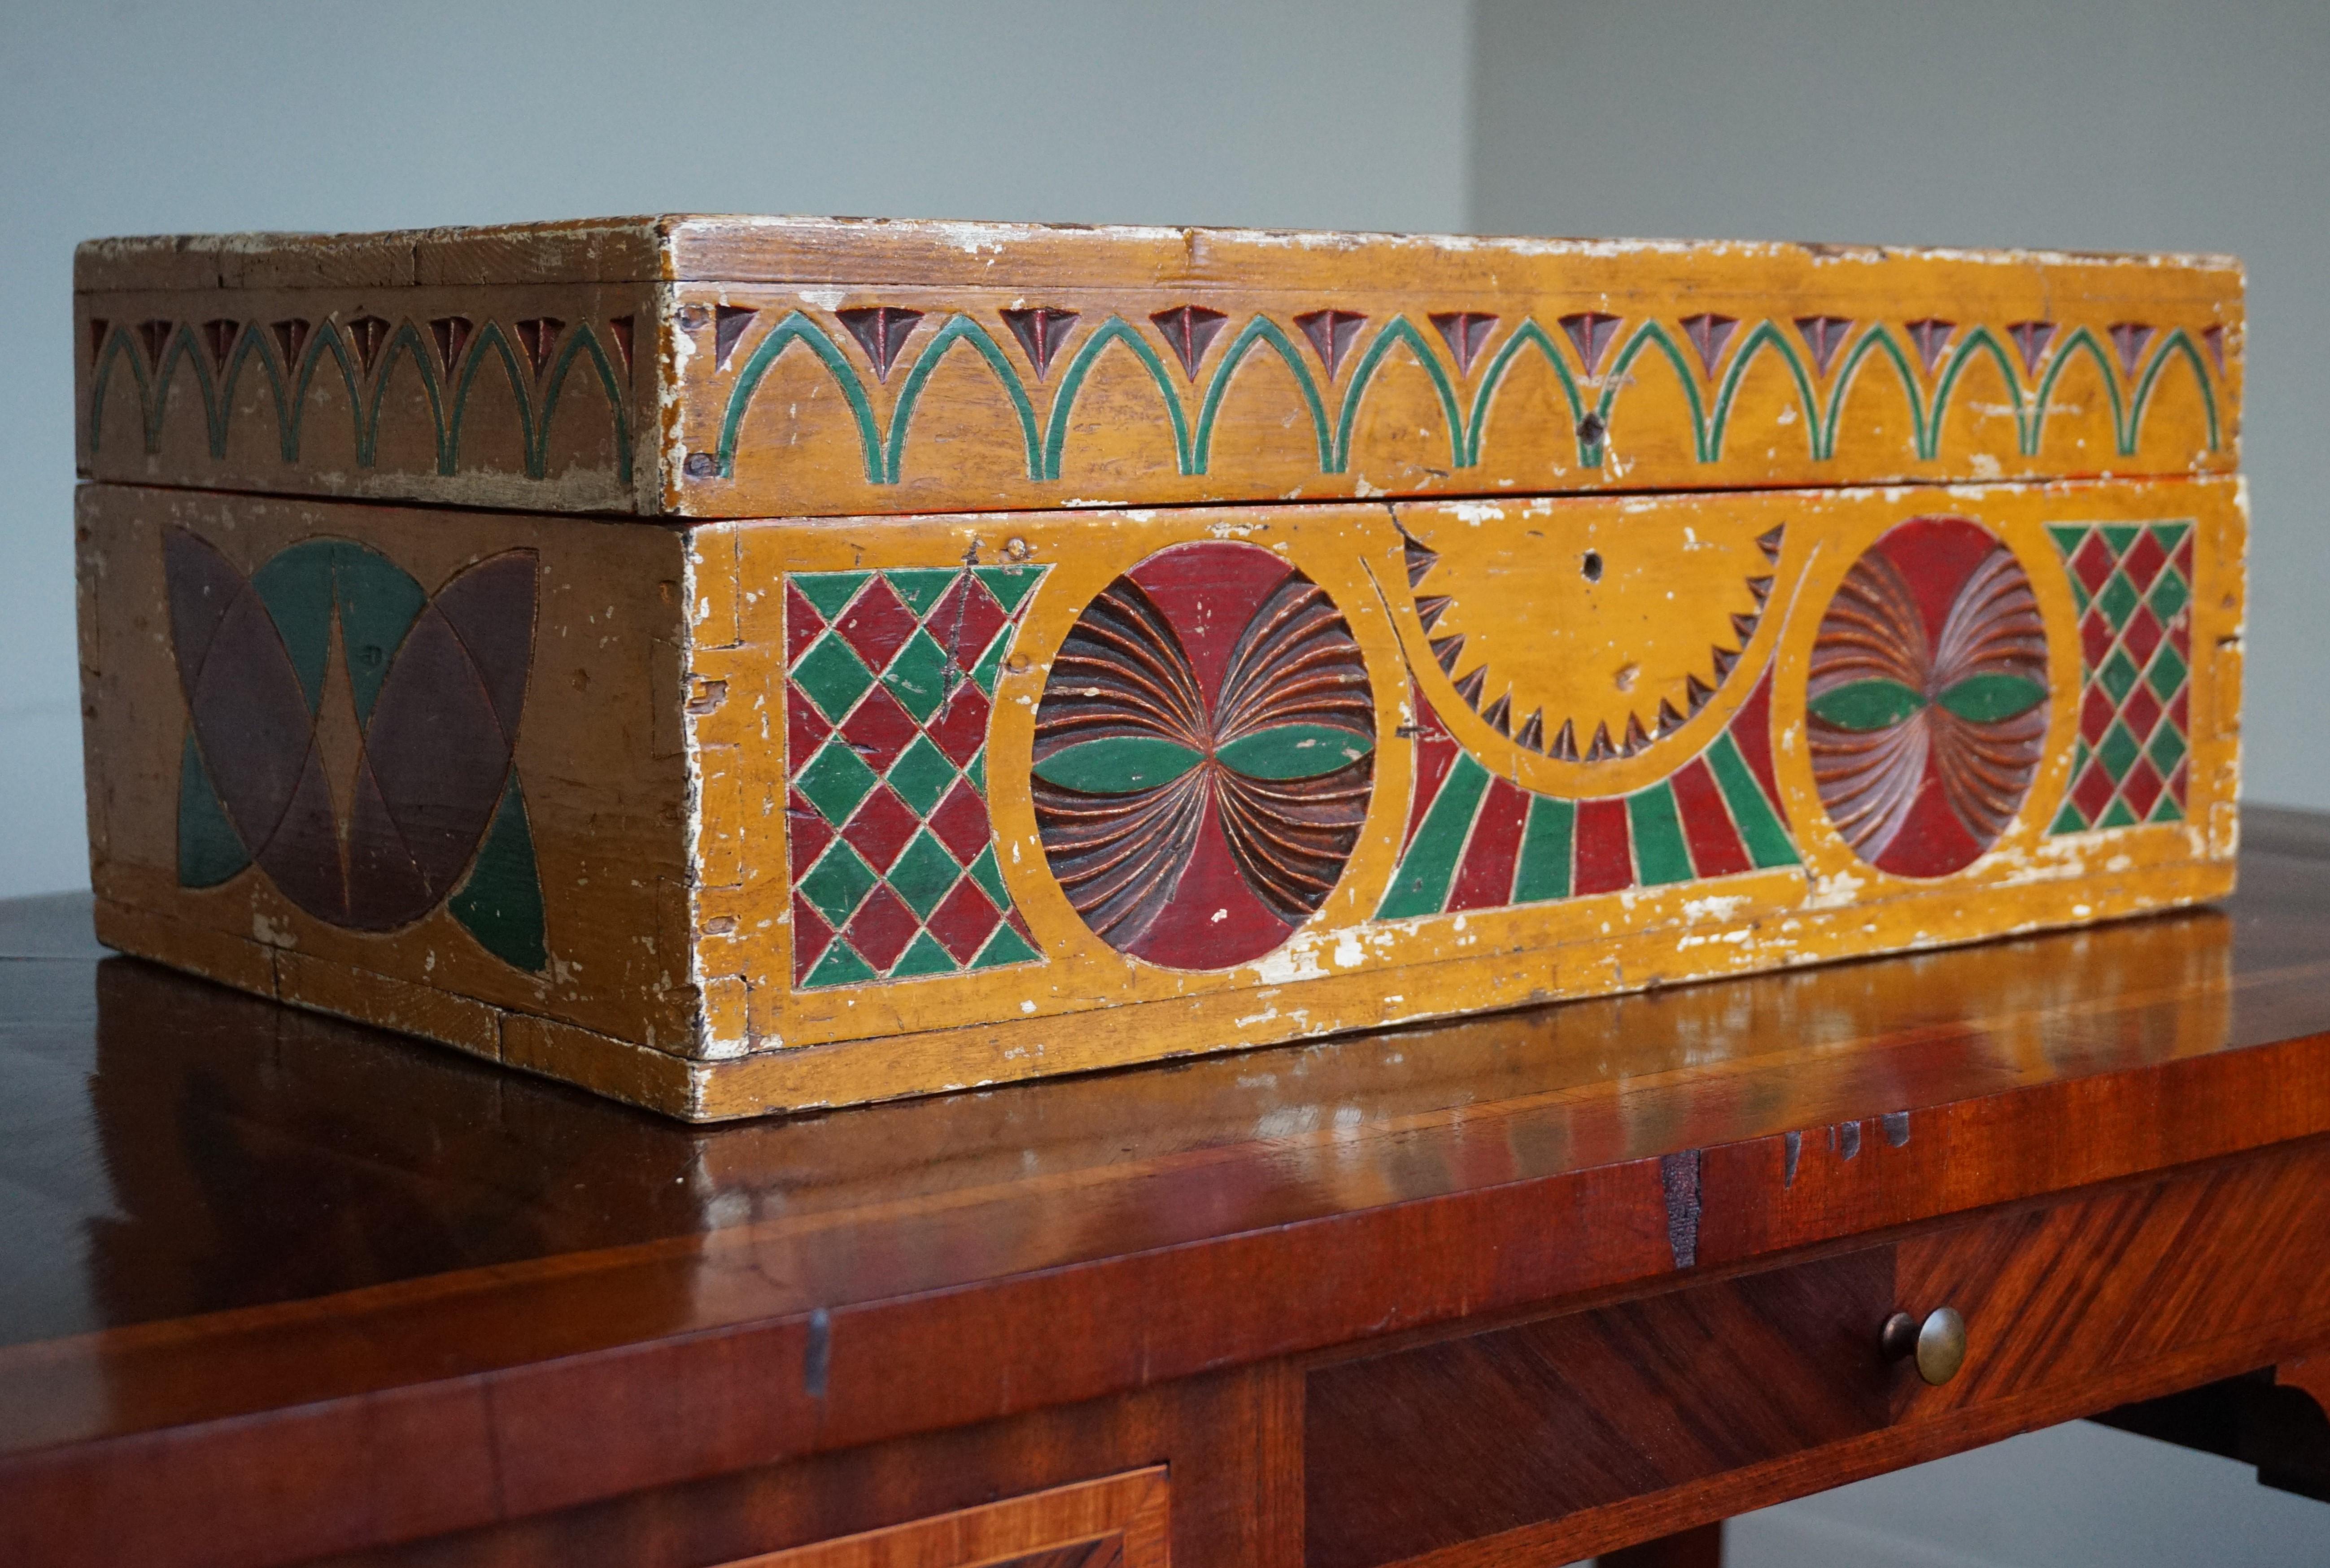 Unique and colorful antique box for all kinds of purposes.

In the earliest years of the 1900s highly skilled craftsmen all over Europe began creating unique and colorful works of art. They were passionate about re-introducing the quality, style